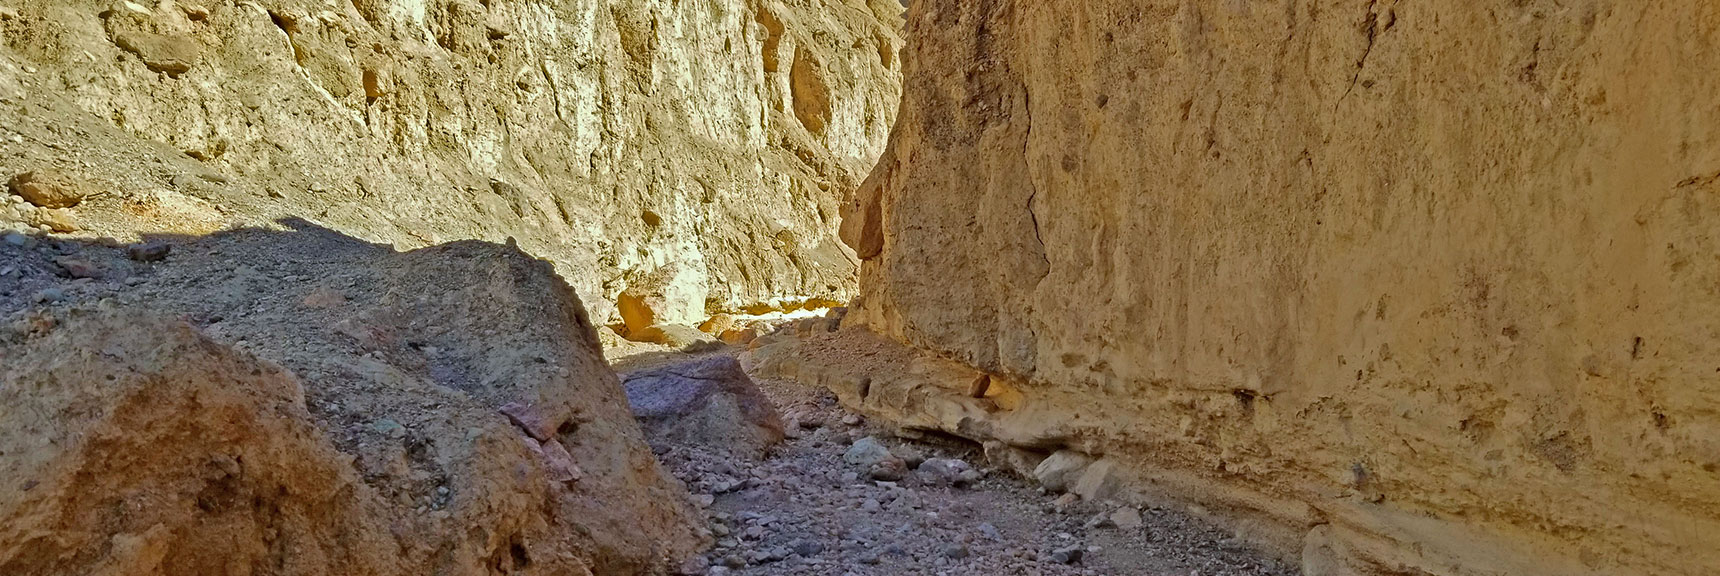 Immediately High Vertical Walls in First Dip Canyon | Artists Drive Hidden Canyon Hikes | Death Valley National Park, California